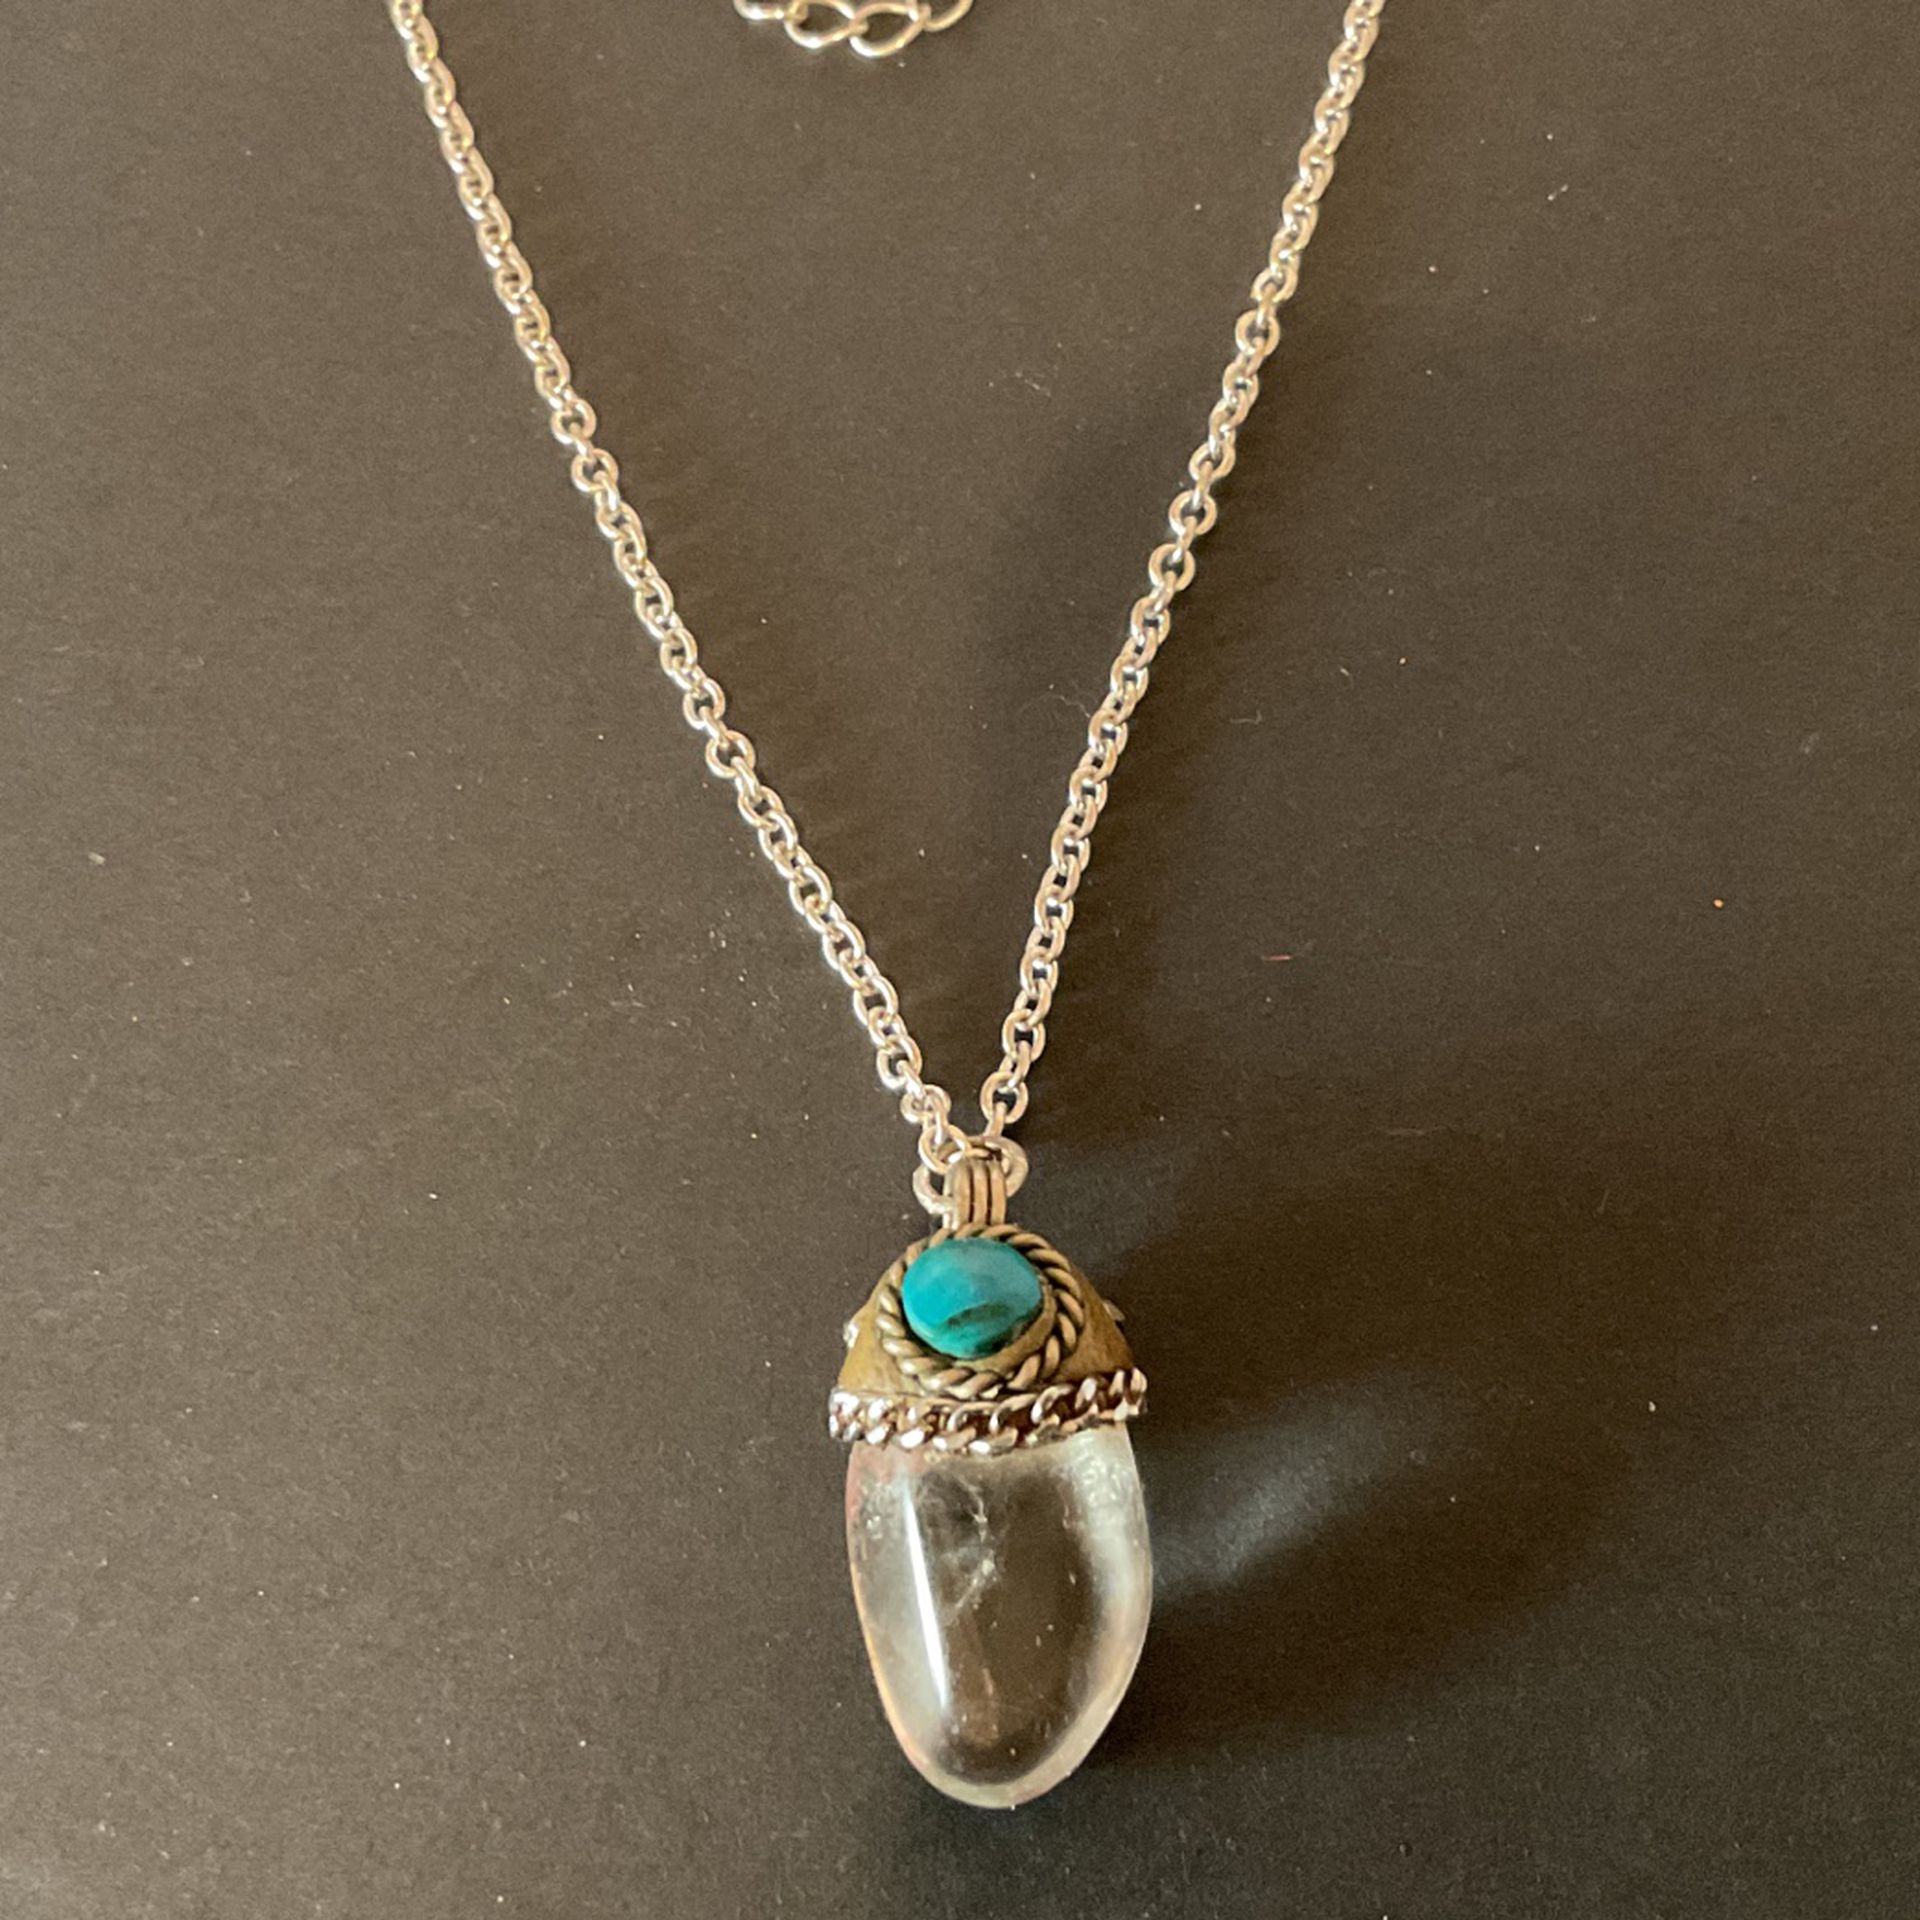 18” Vintage SilverTone Necklace With Genuine Leather,Stainless Steel,Turquoise Stone,and Glass Pendant 